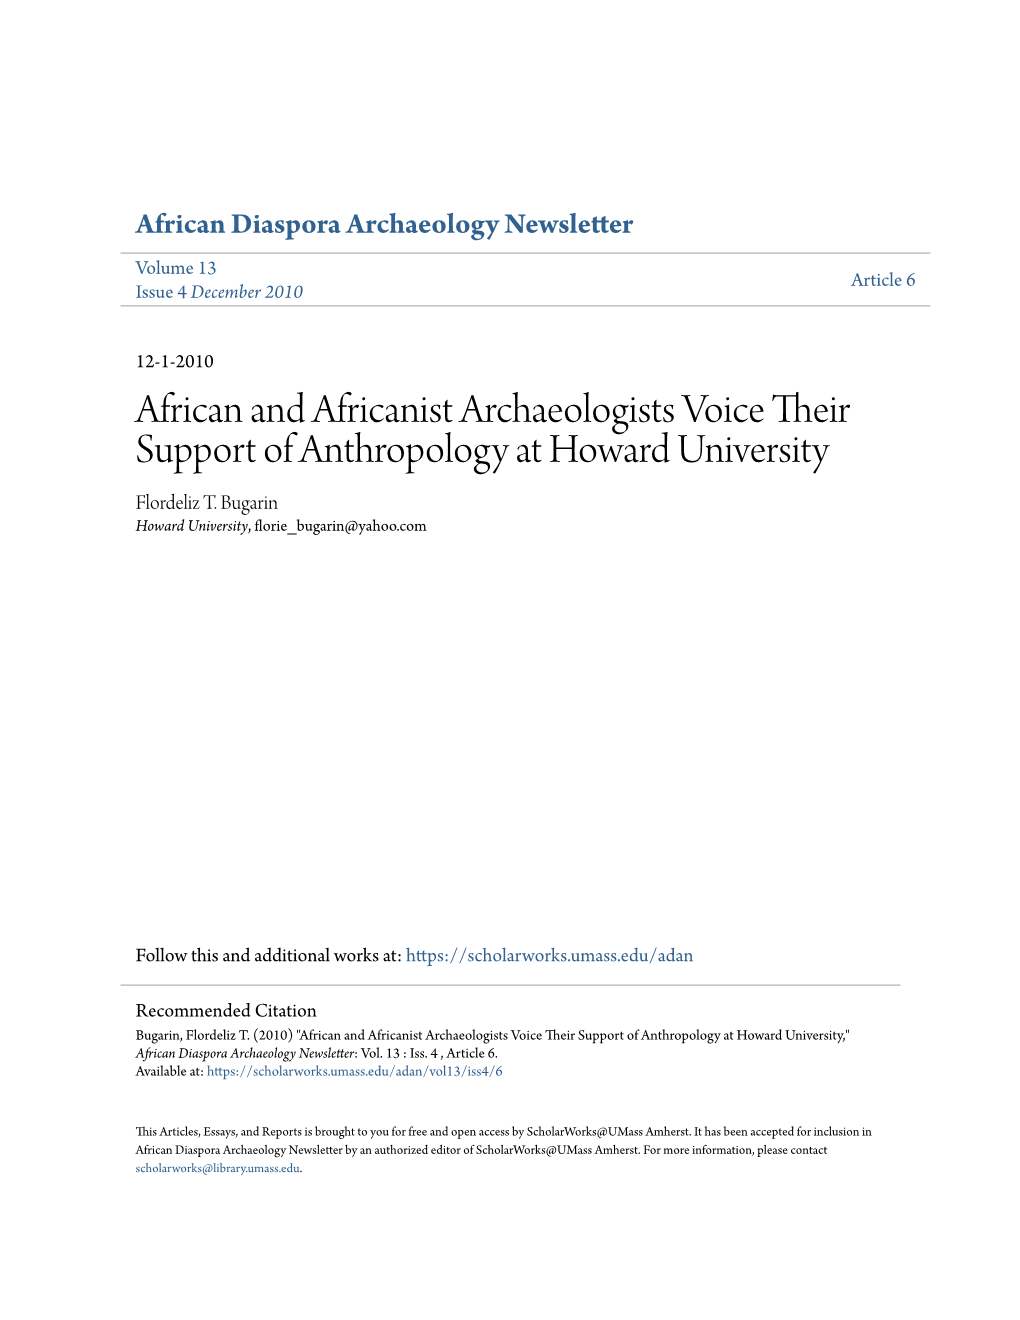 African and Africanist Archaeologists Voice Their Support of Anthropology at Howard University Flordeliz T